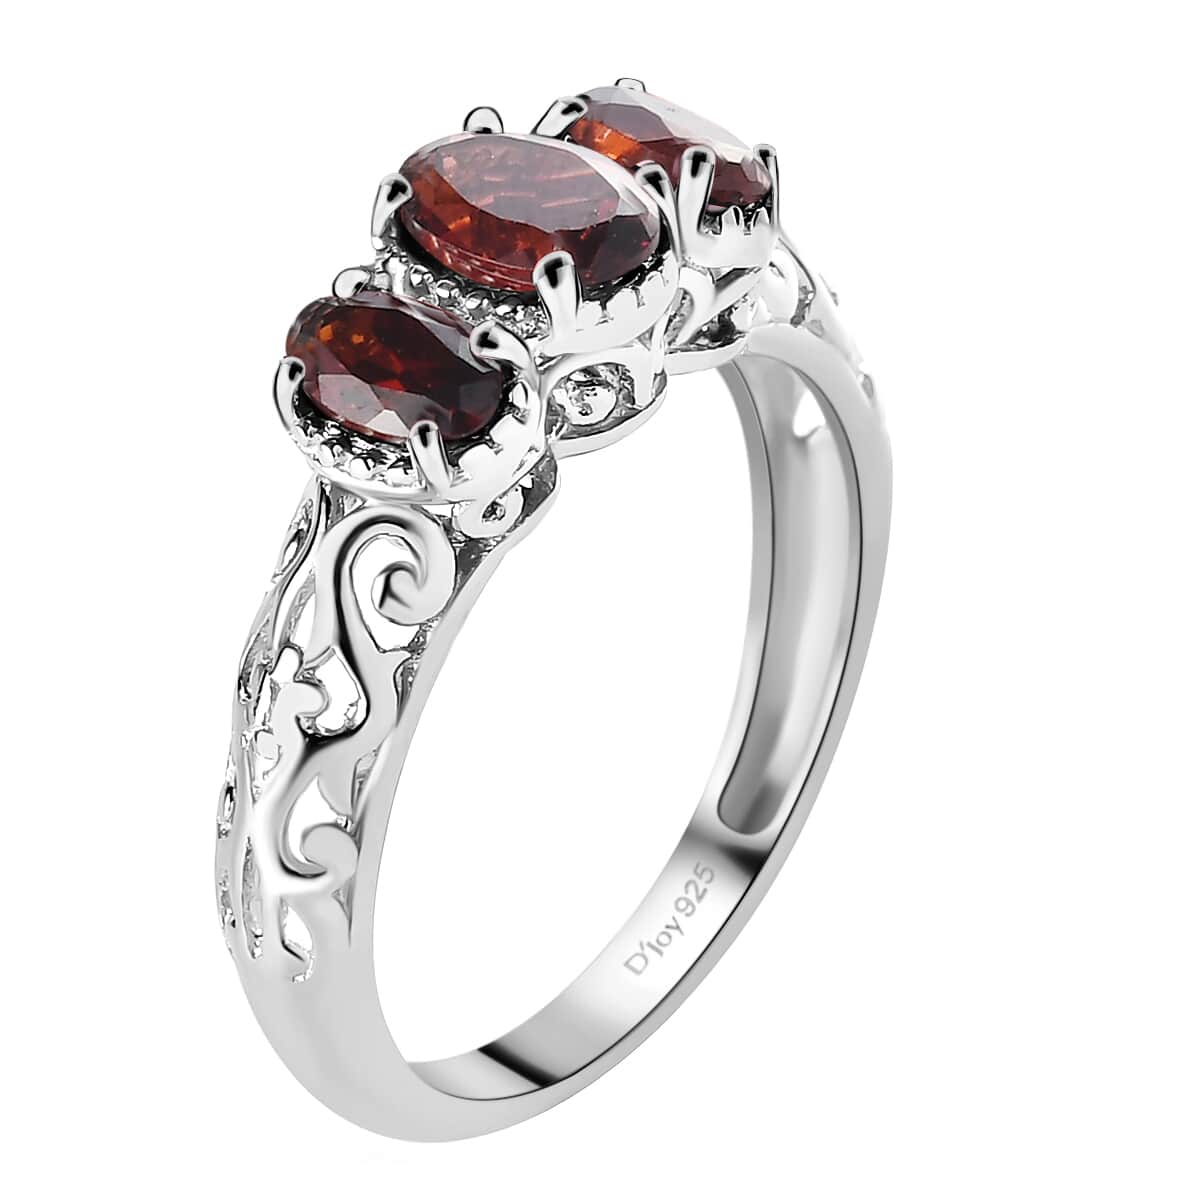 Garnet Ring, 3 Stone Garnet Ring, Trilogy Ring, Sterling Silver Ring, Birthstone Jewelry, Mozambique Garnet 3 Stone Ring 1.15 ctw (Size 5.0) image number 6